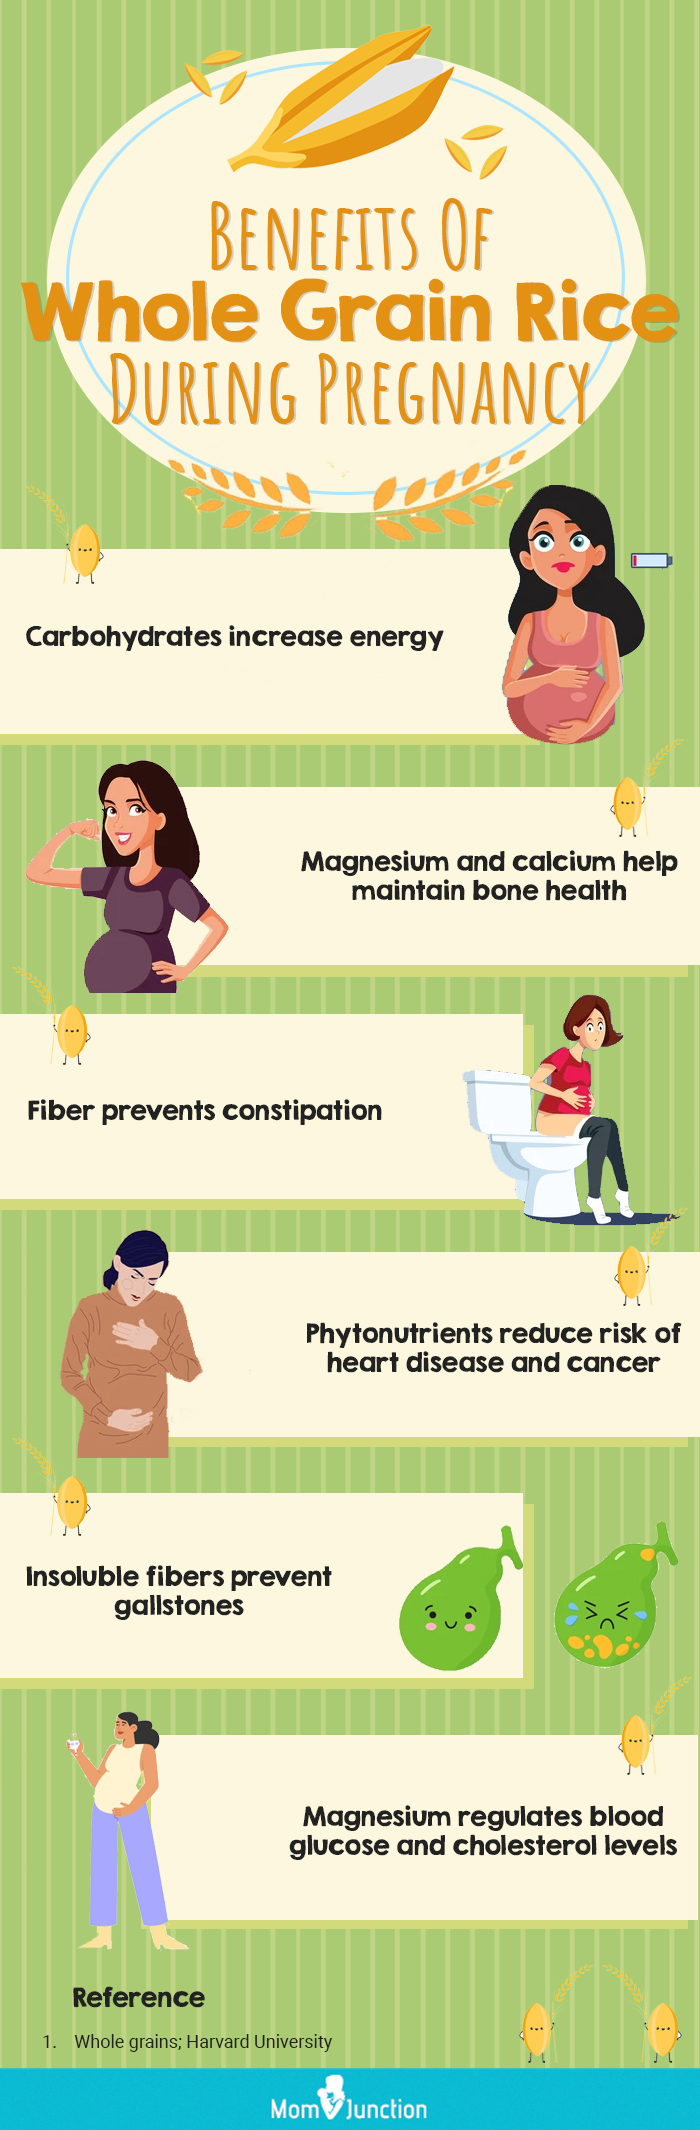 benefits of whole grain rice during pregnancy (infographic)